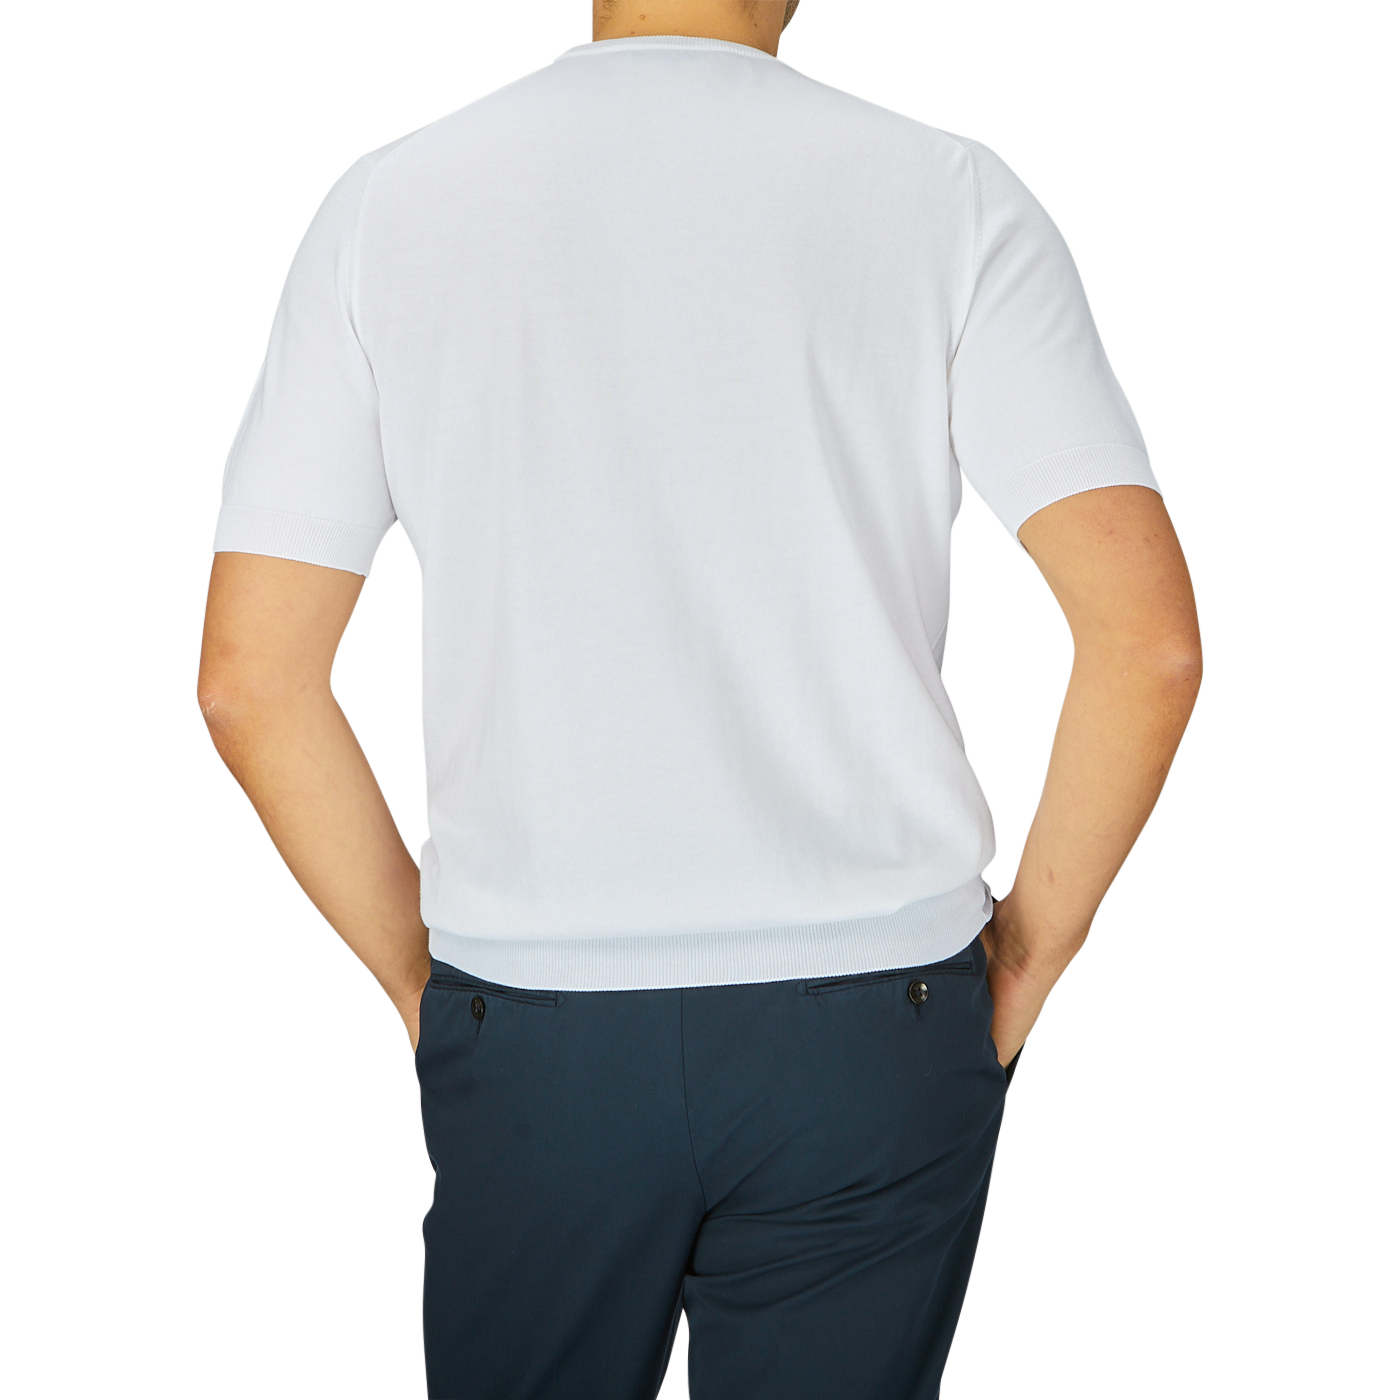 Rear view of a man wearing a Gran Sasso White Organic Cotton T-shirt and dark trousers, standing against a light gray background.